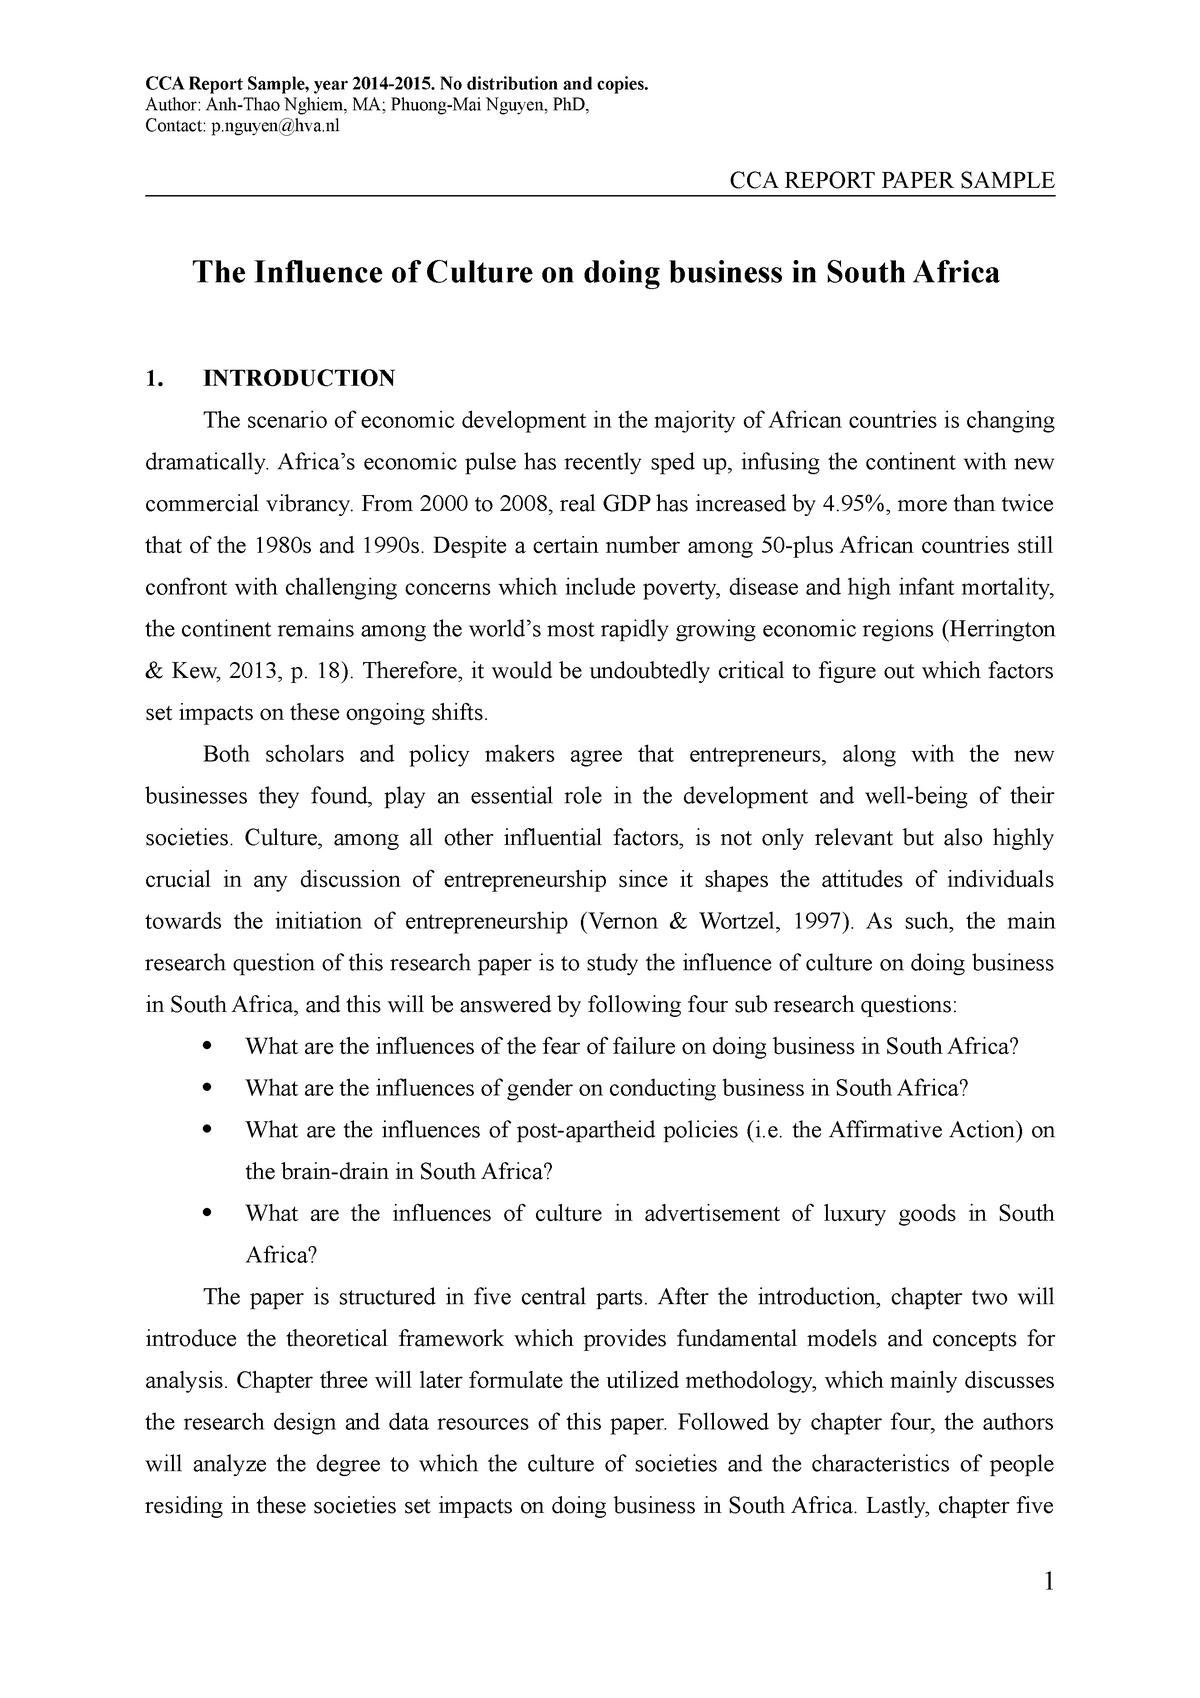 african culture essay conclusion